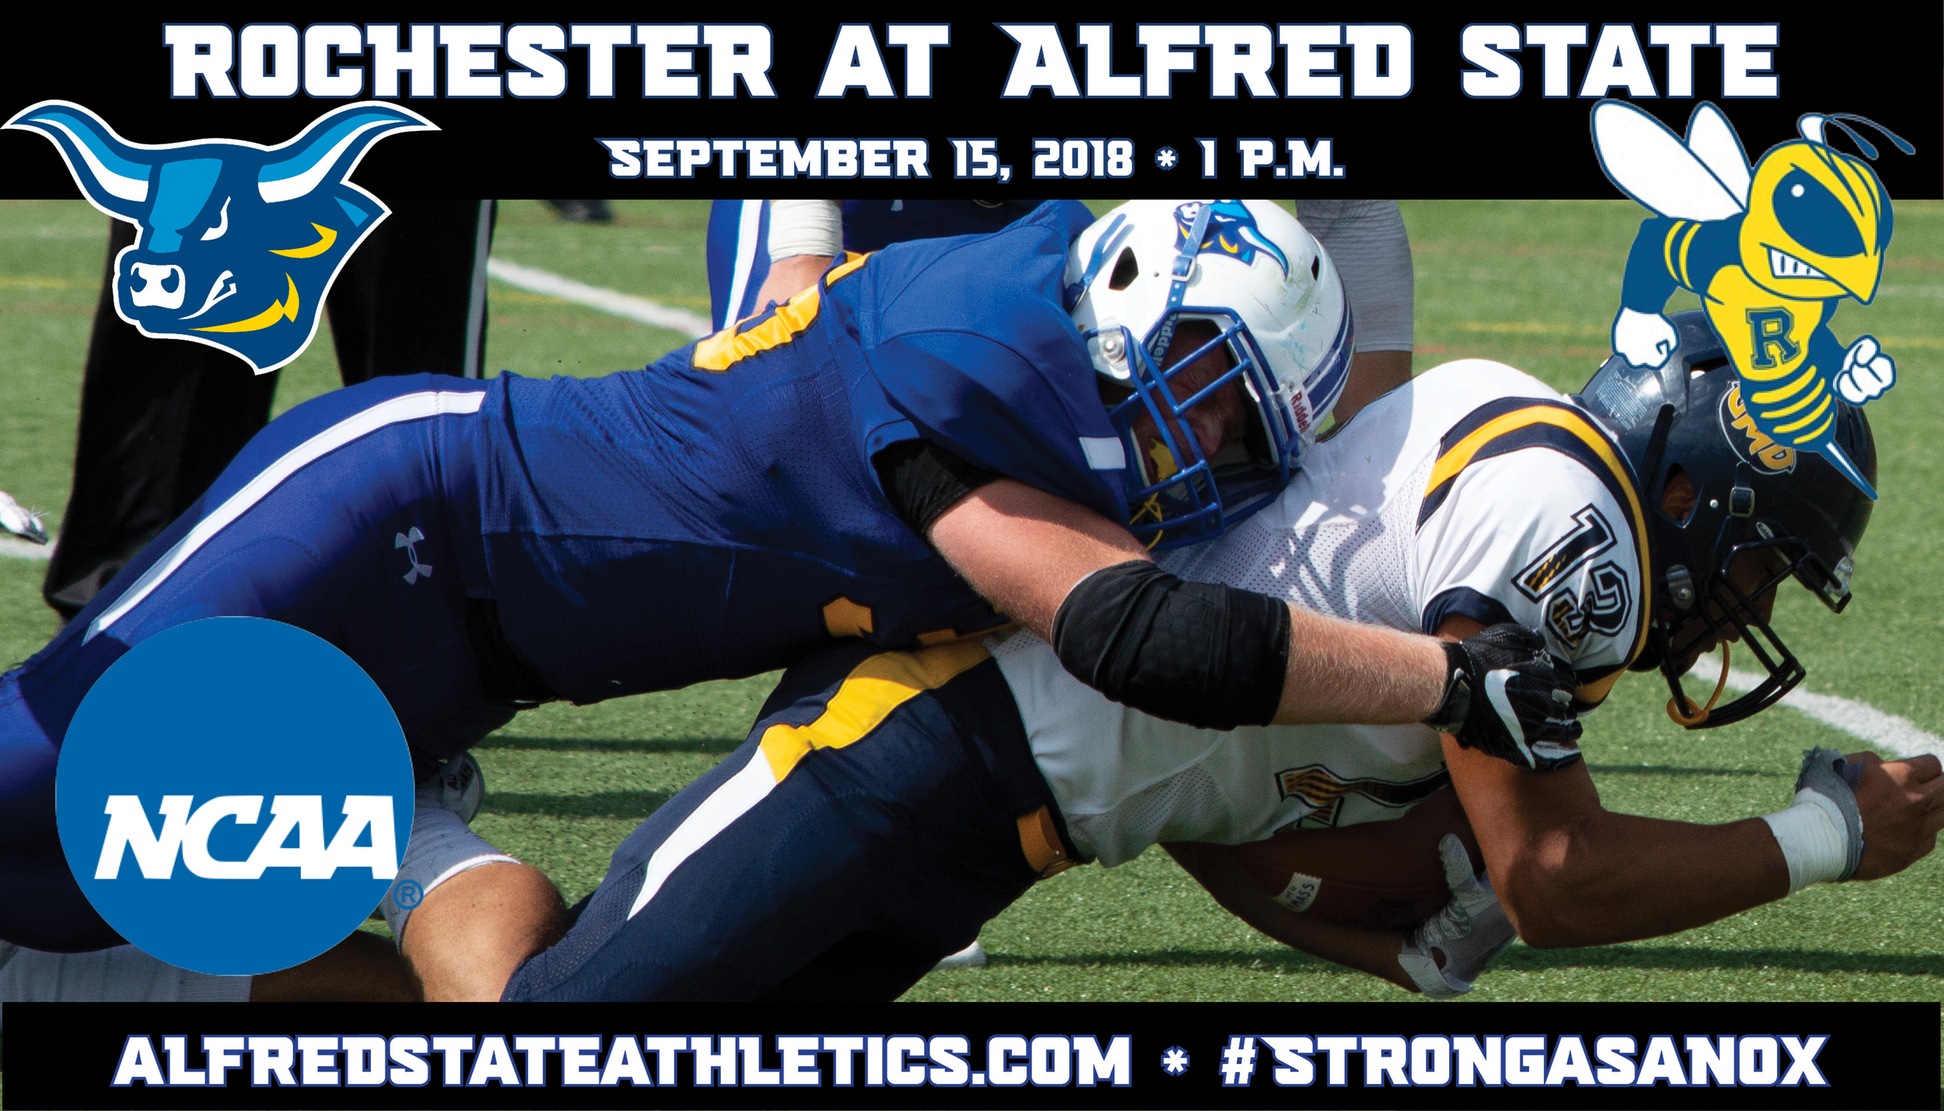 Alfred State hosts Rochester on Sept. 15